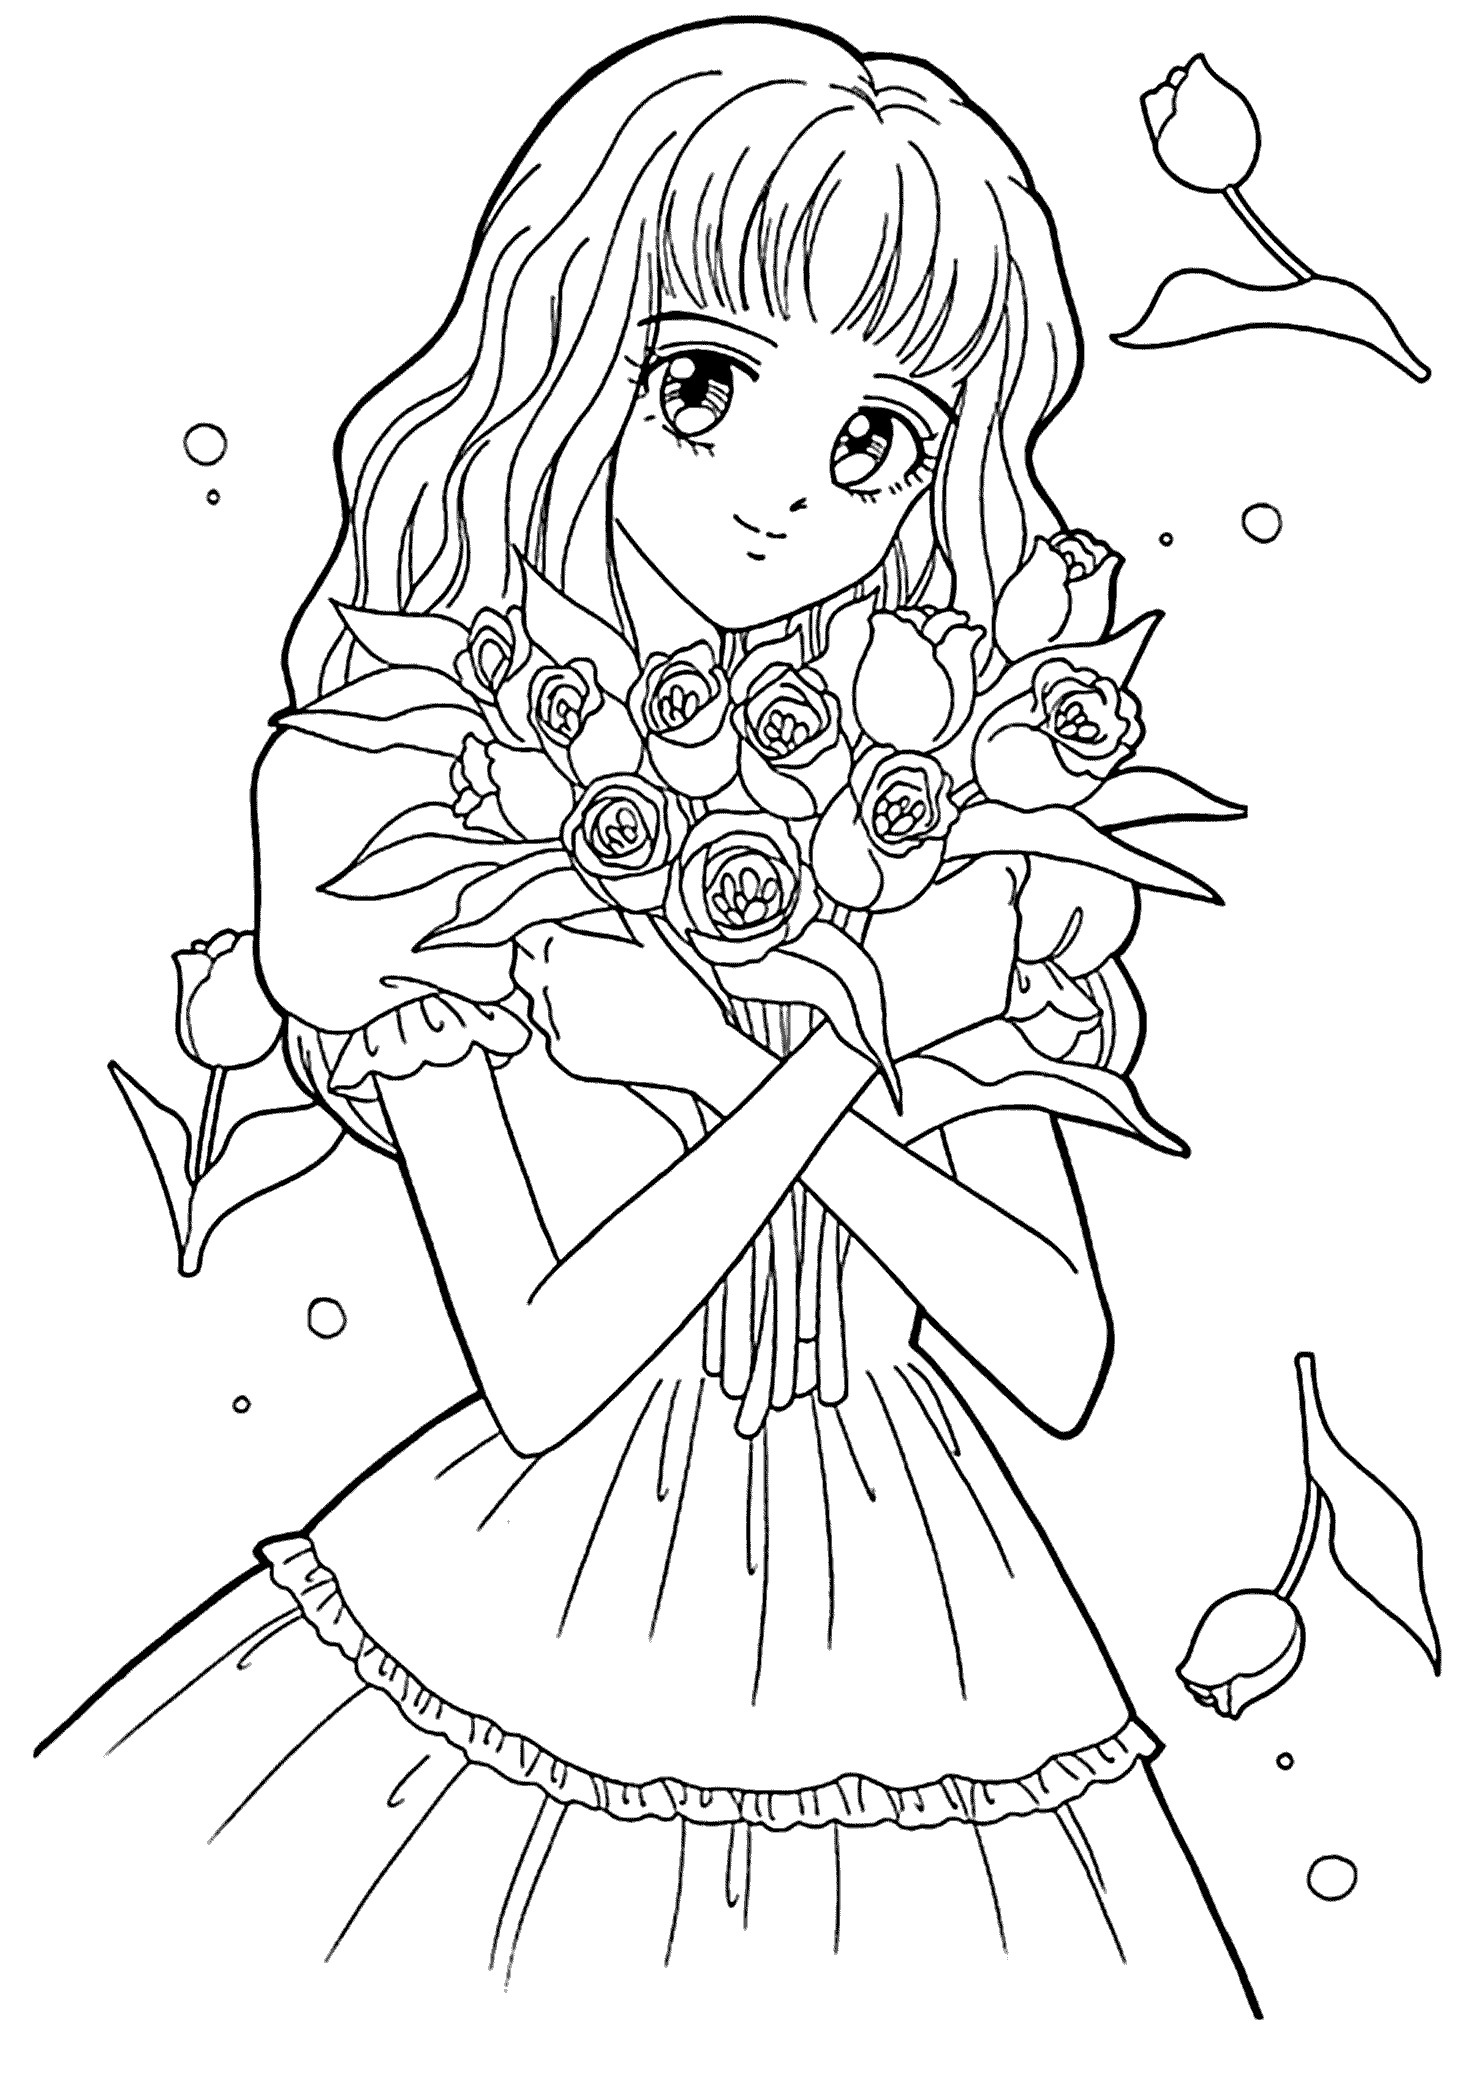 Coloring Sheets For Girls To Print Out
 Best Free Printable Coloring Pages for Kids and Teens